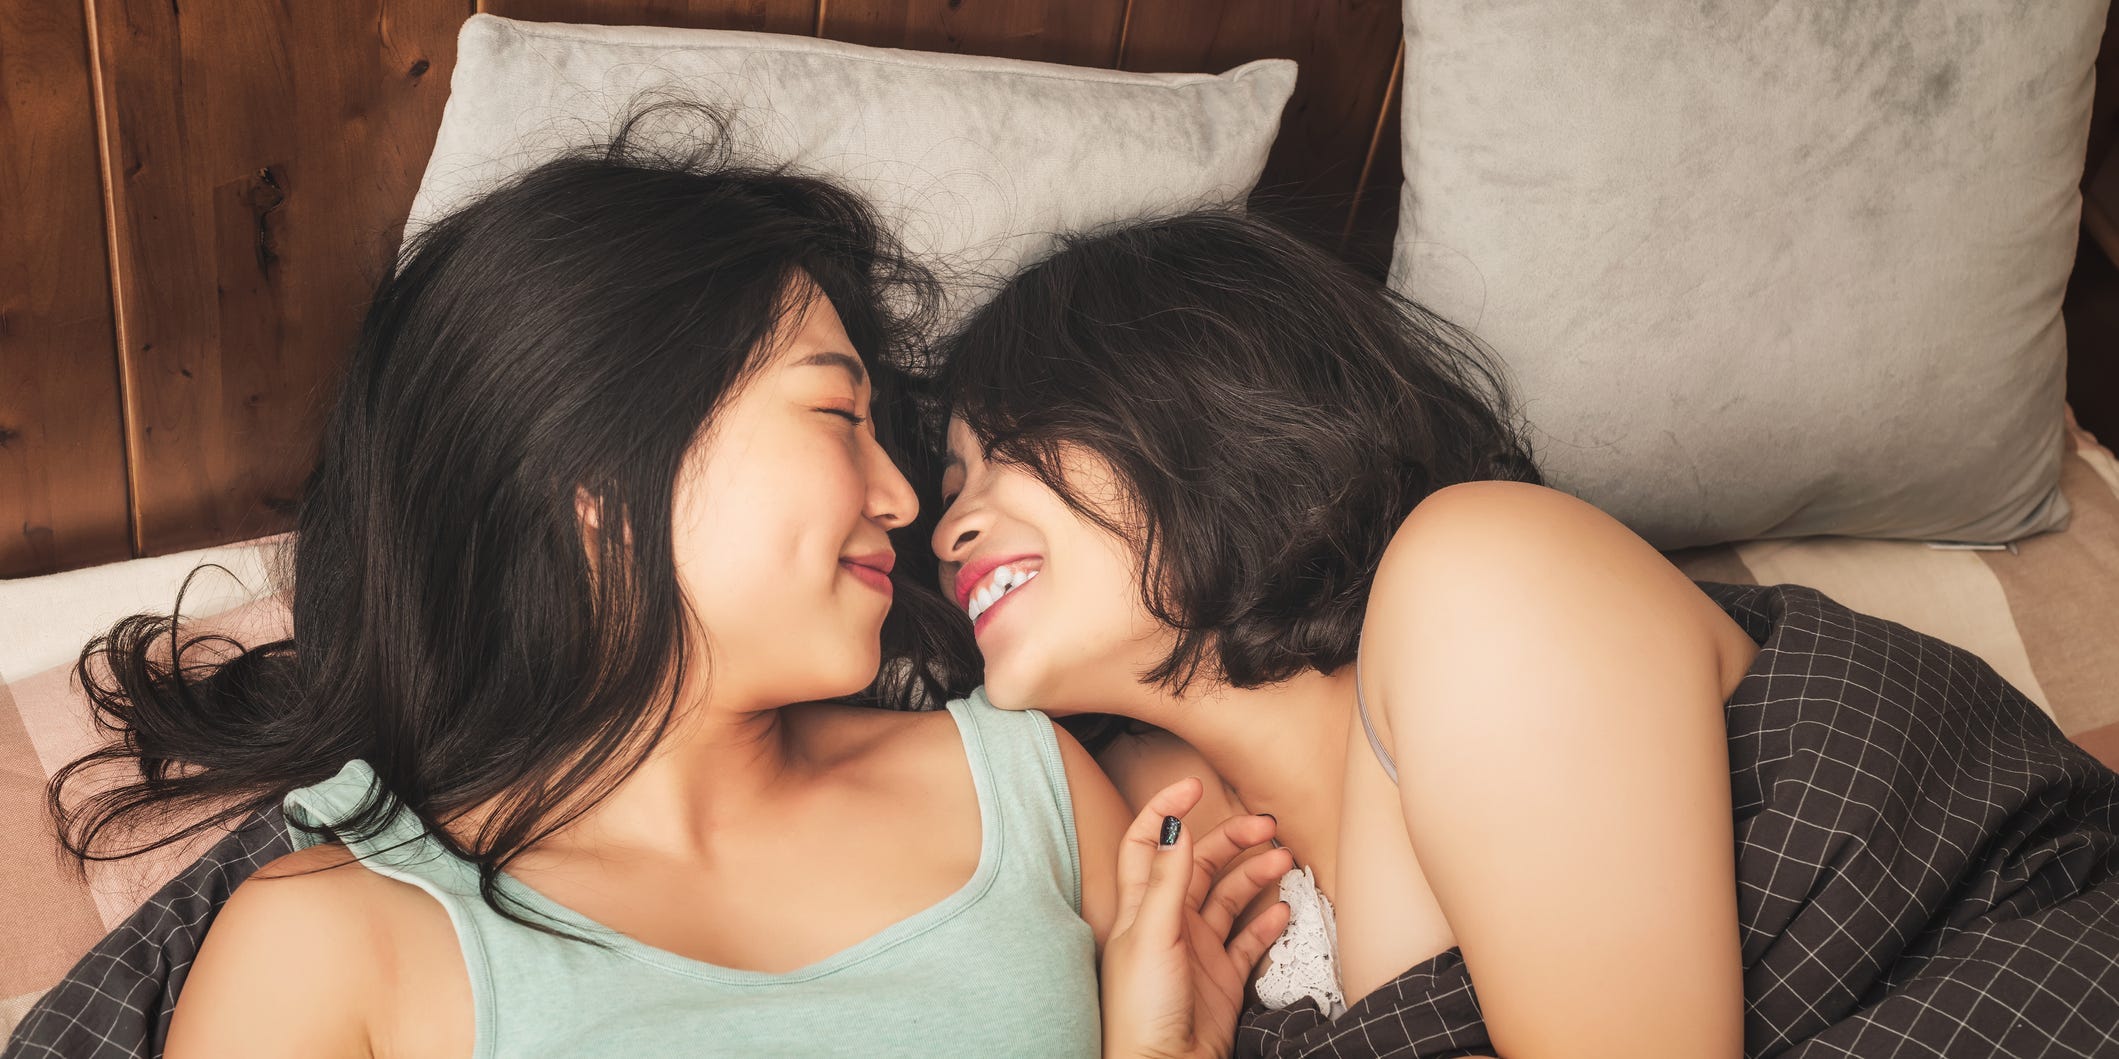 5 steamy sex positions for lesbians, according to a sex therapist pic image